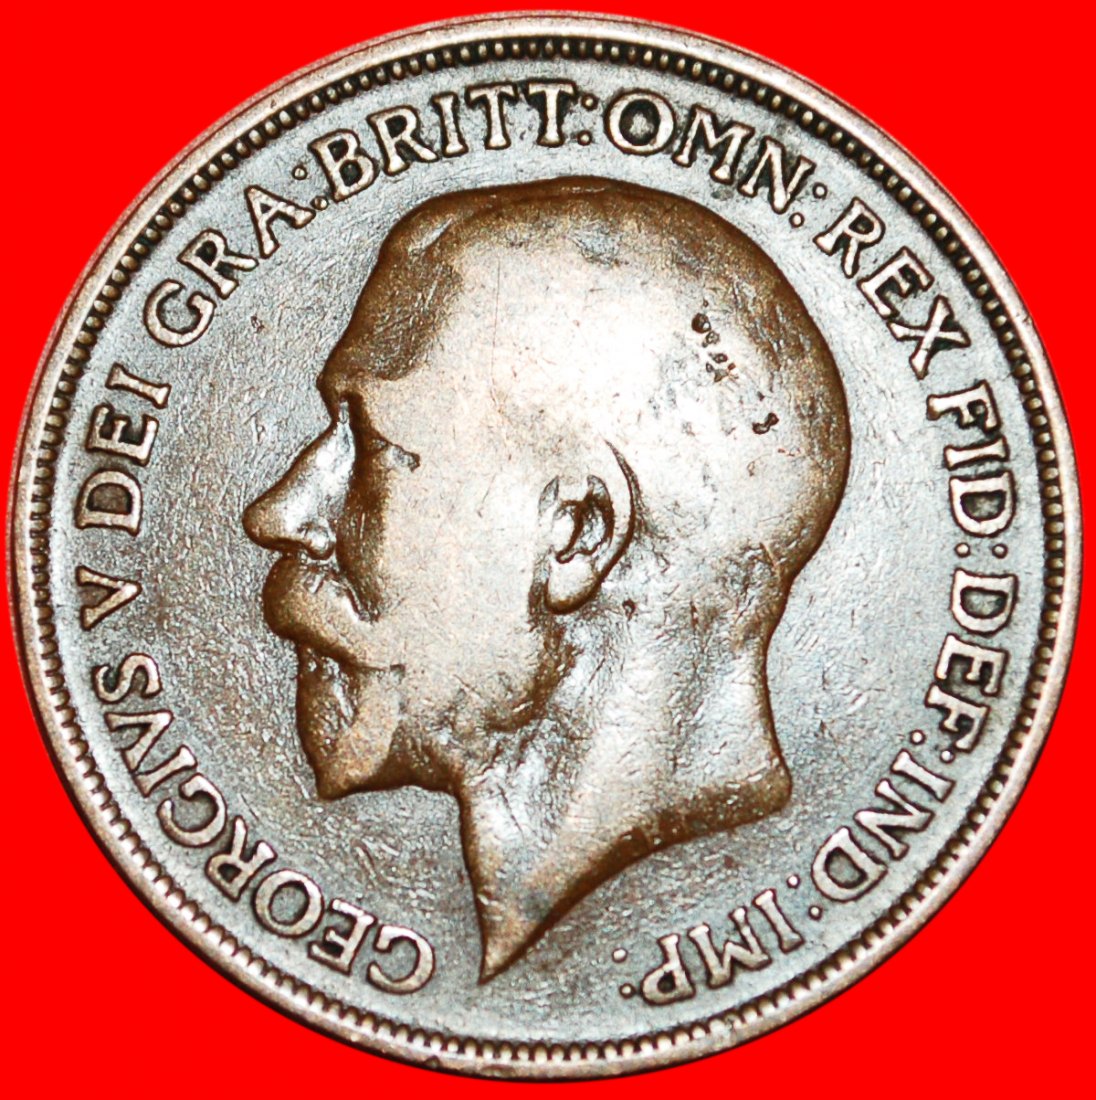  * GREAT BRITAIN: UNITED KINGDOM ★PENNY 1914! GEORGE V (1911-1936) ★LOW START ★ NO RESERVE!   